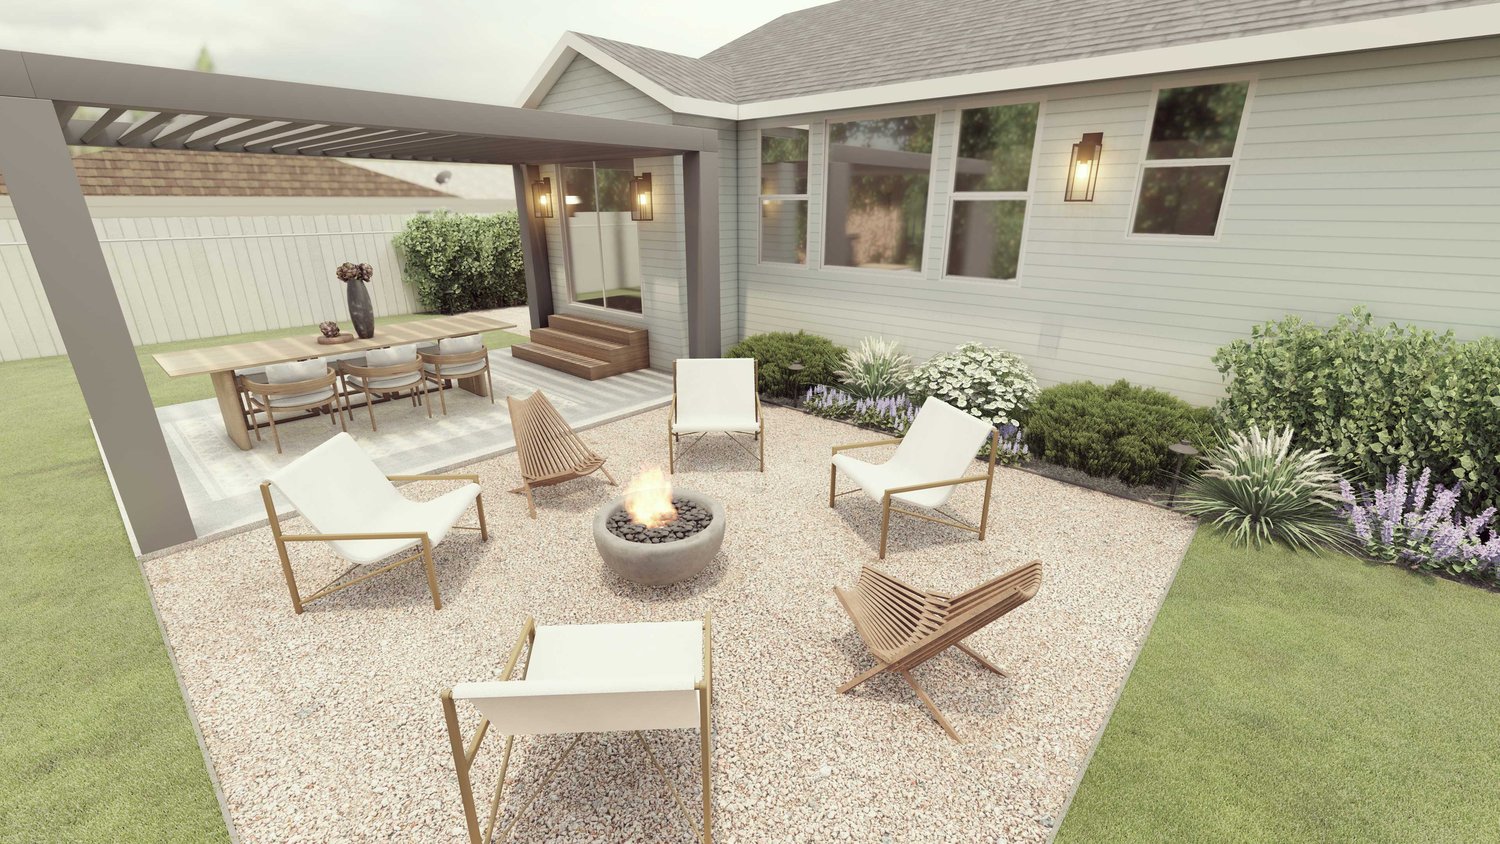 Twin Falls front yard with gravel fire pit seating area, a patio with pergola over dining area